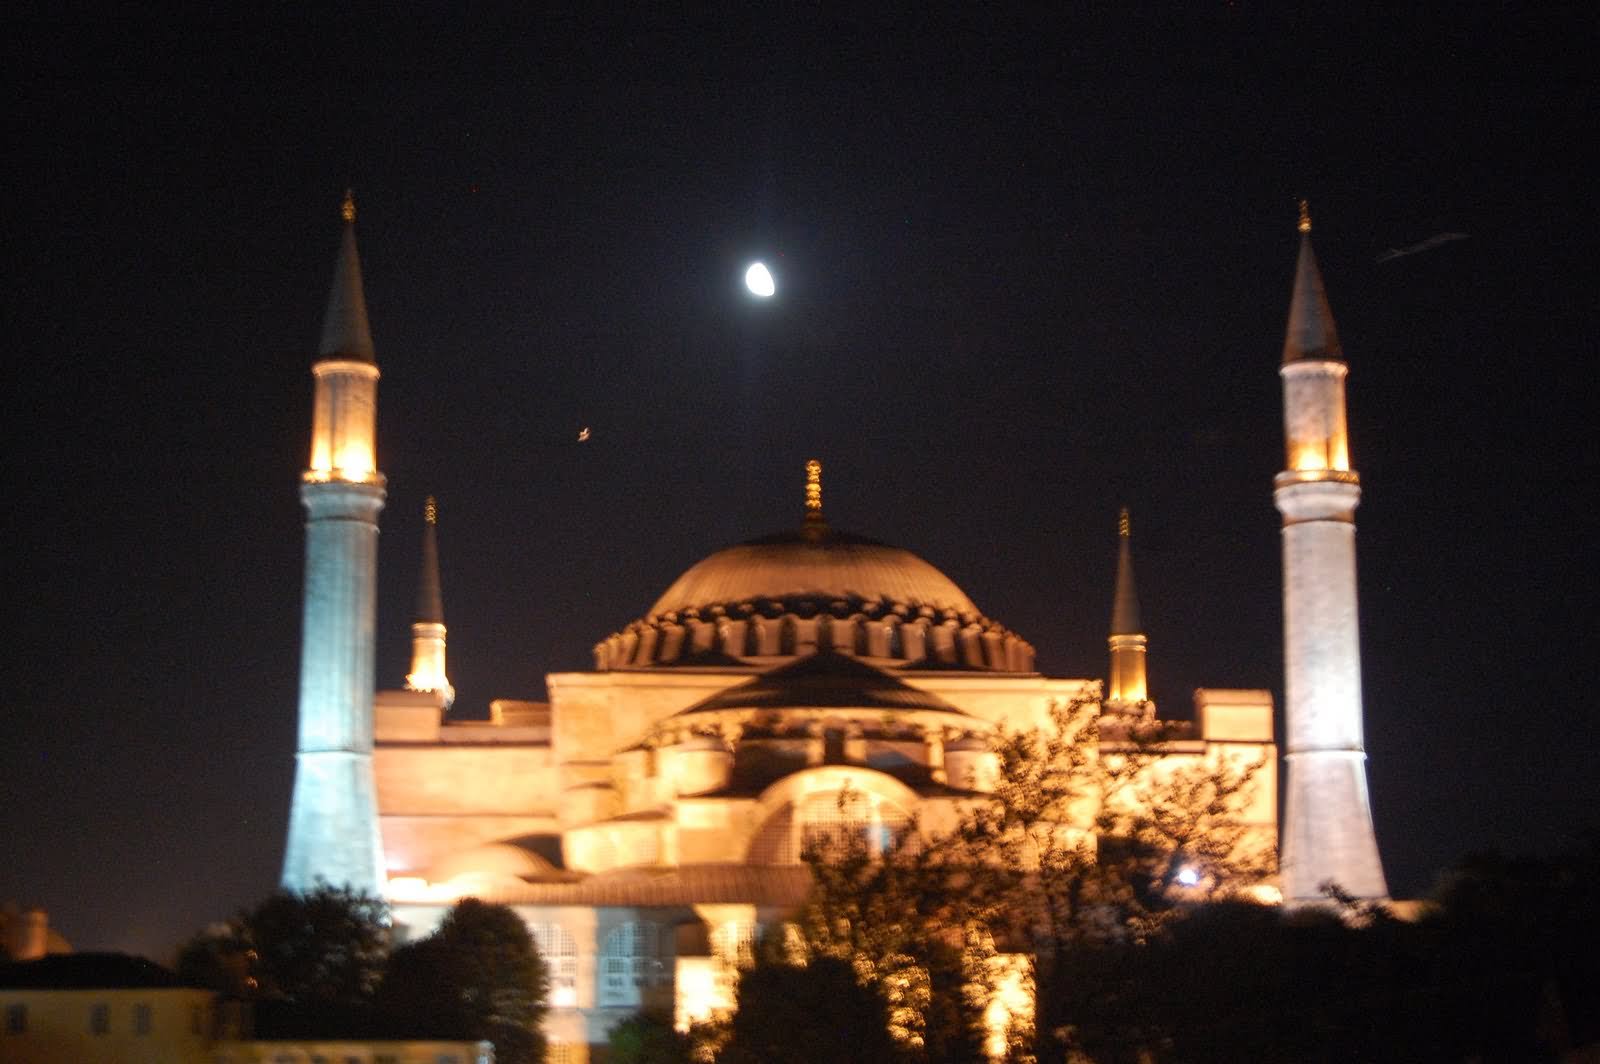 Night Picture Of The Hagia Sophia With Moon